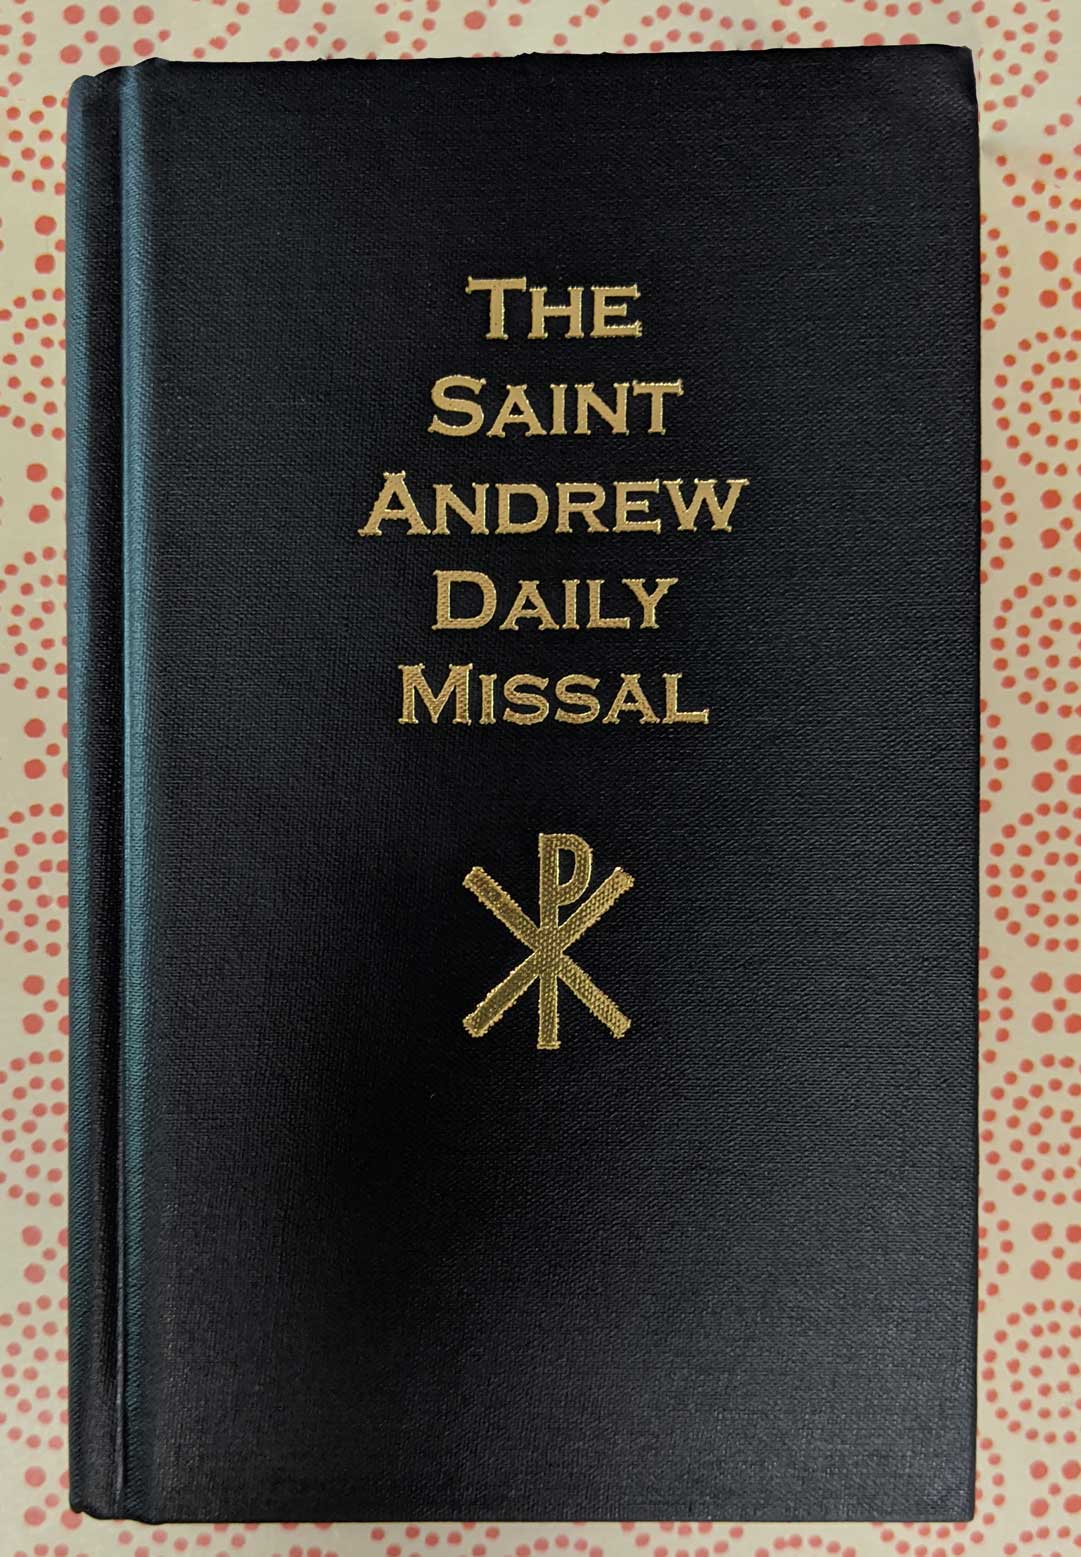 the saint andrew daily missal